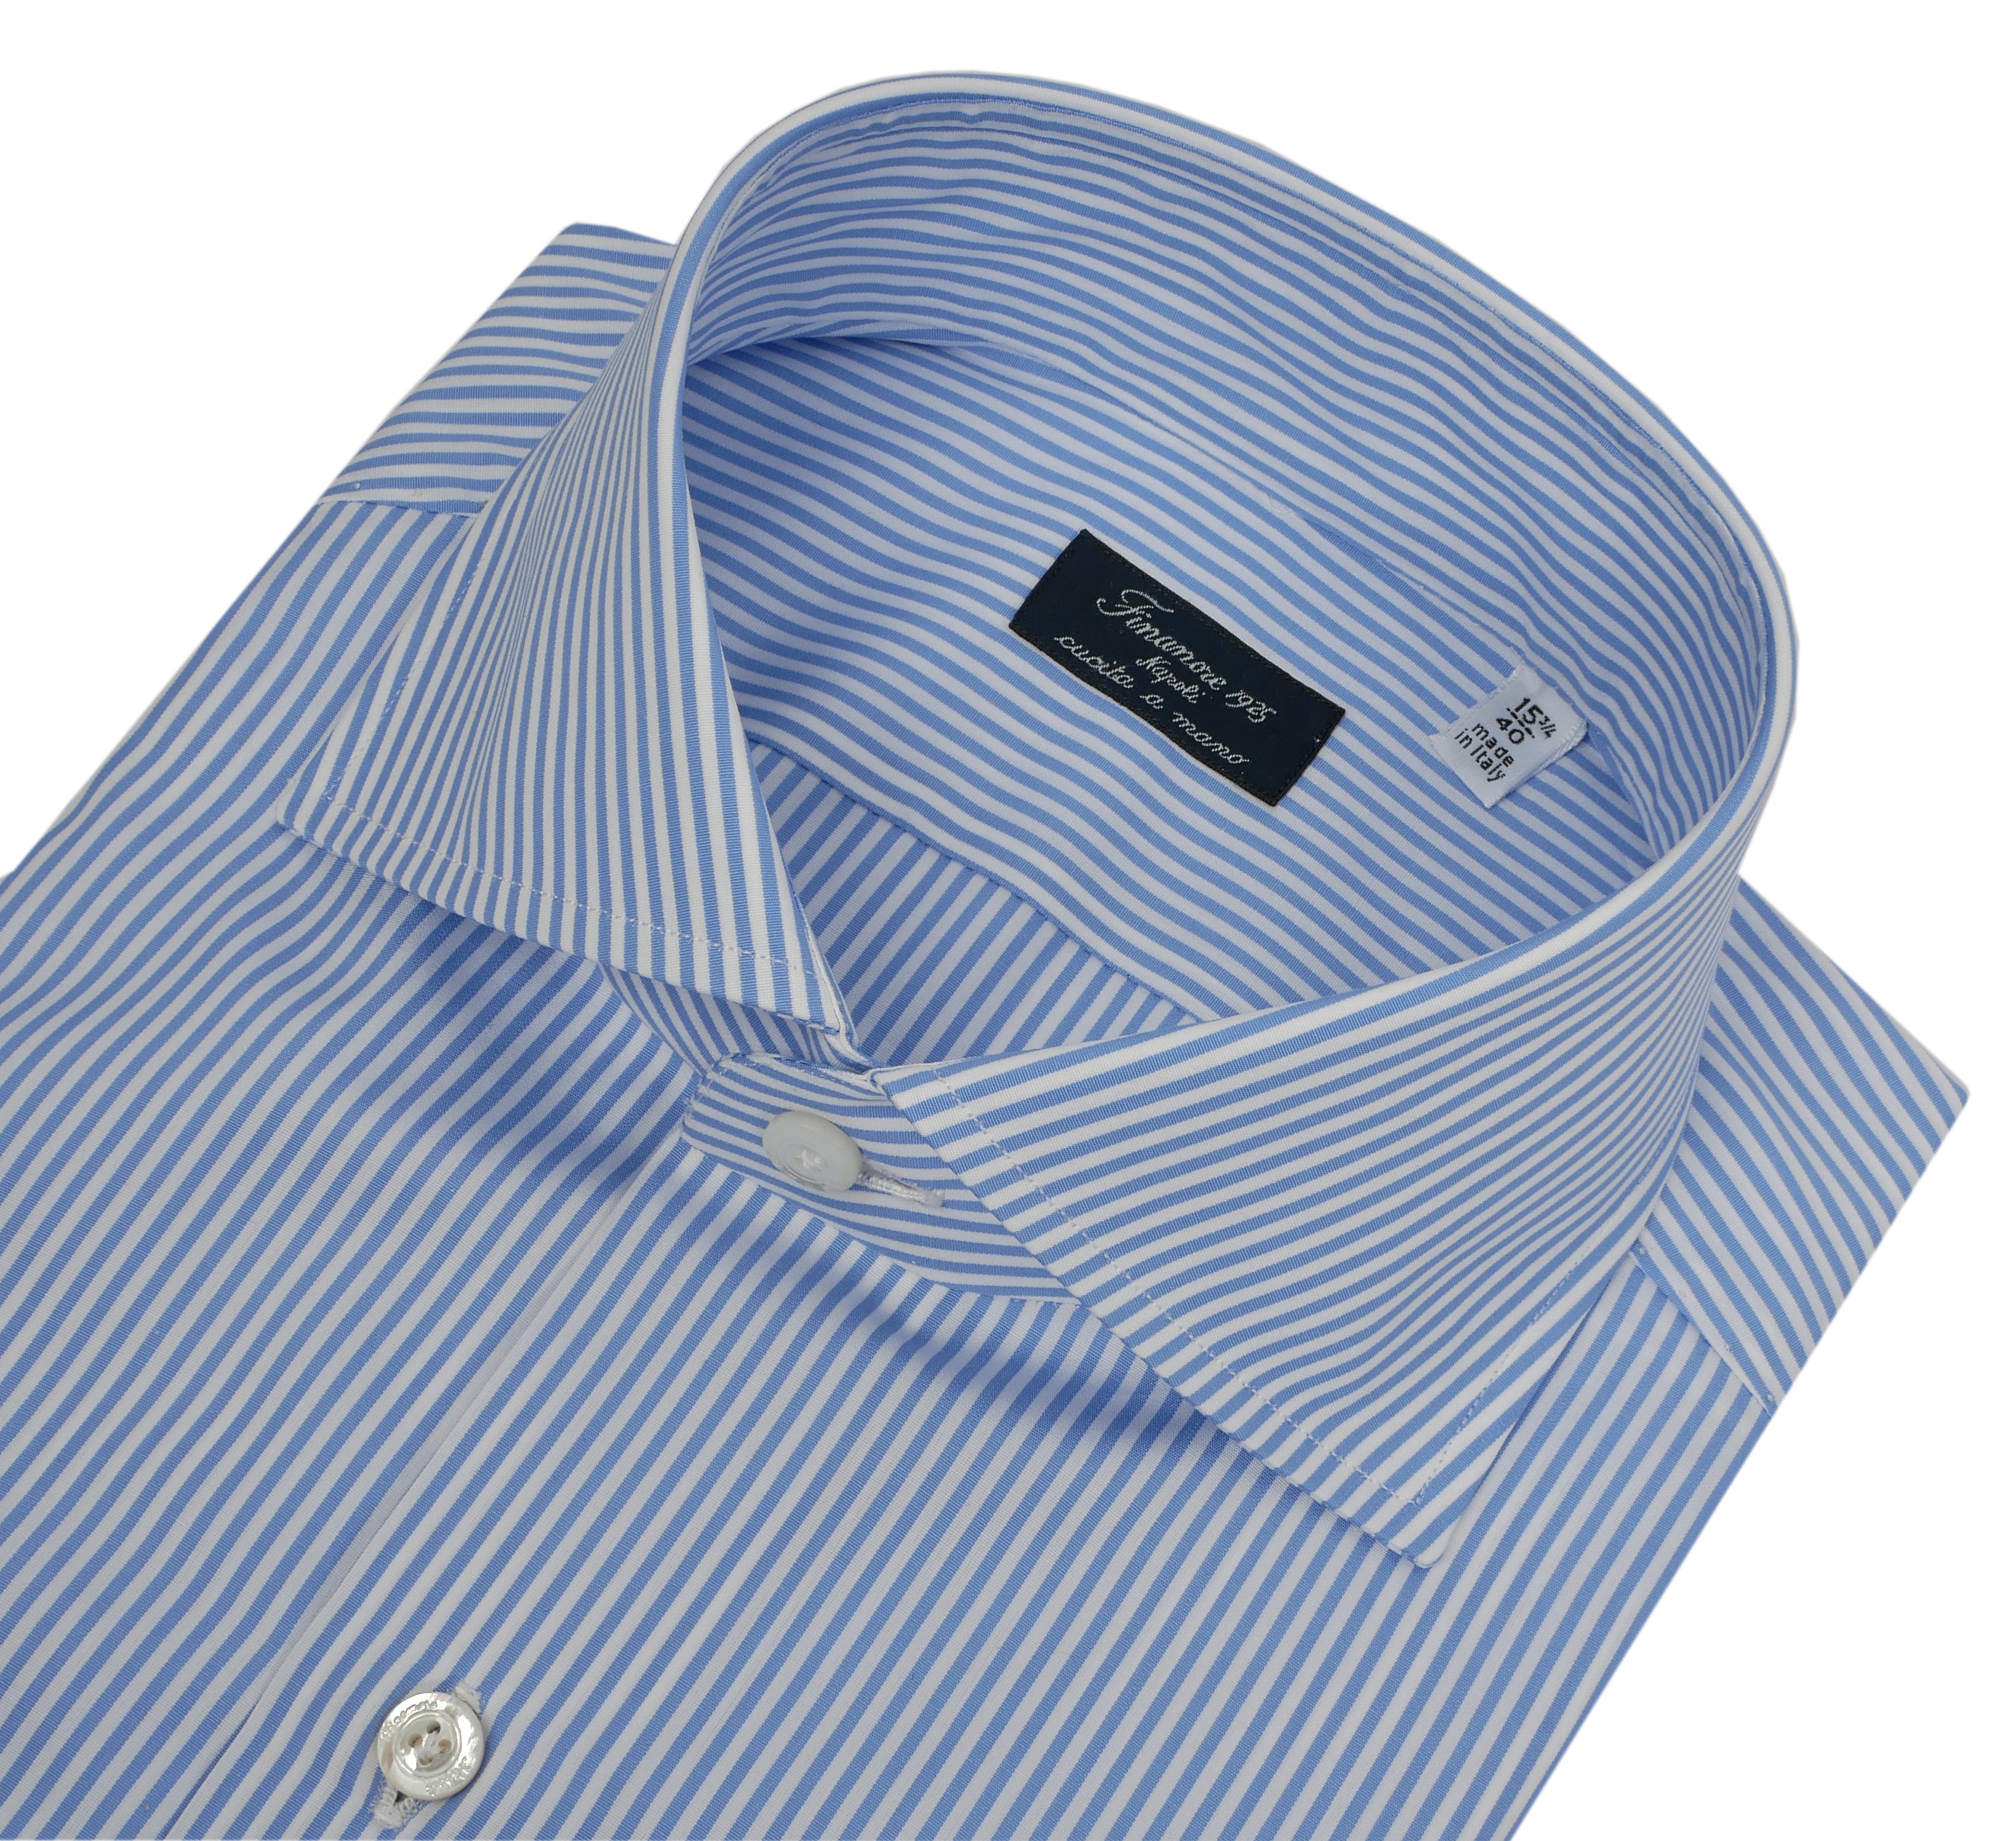 Tailored shirt in double twisted poplin cotton from the Naples line